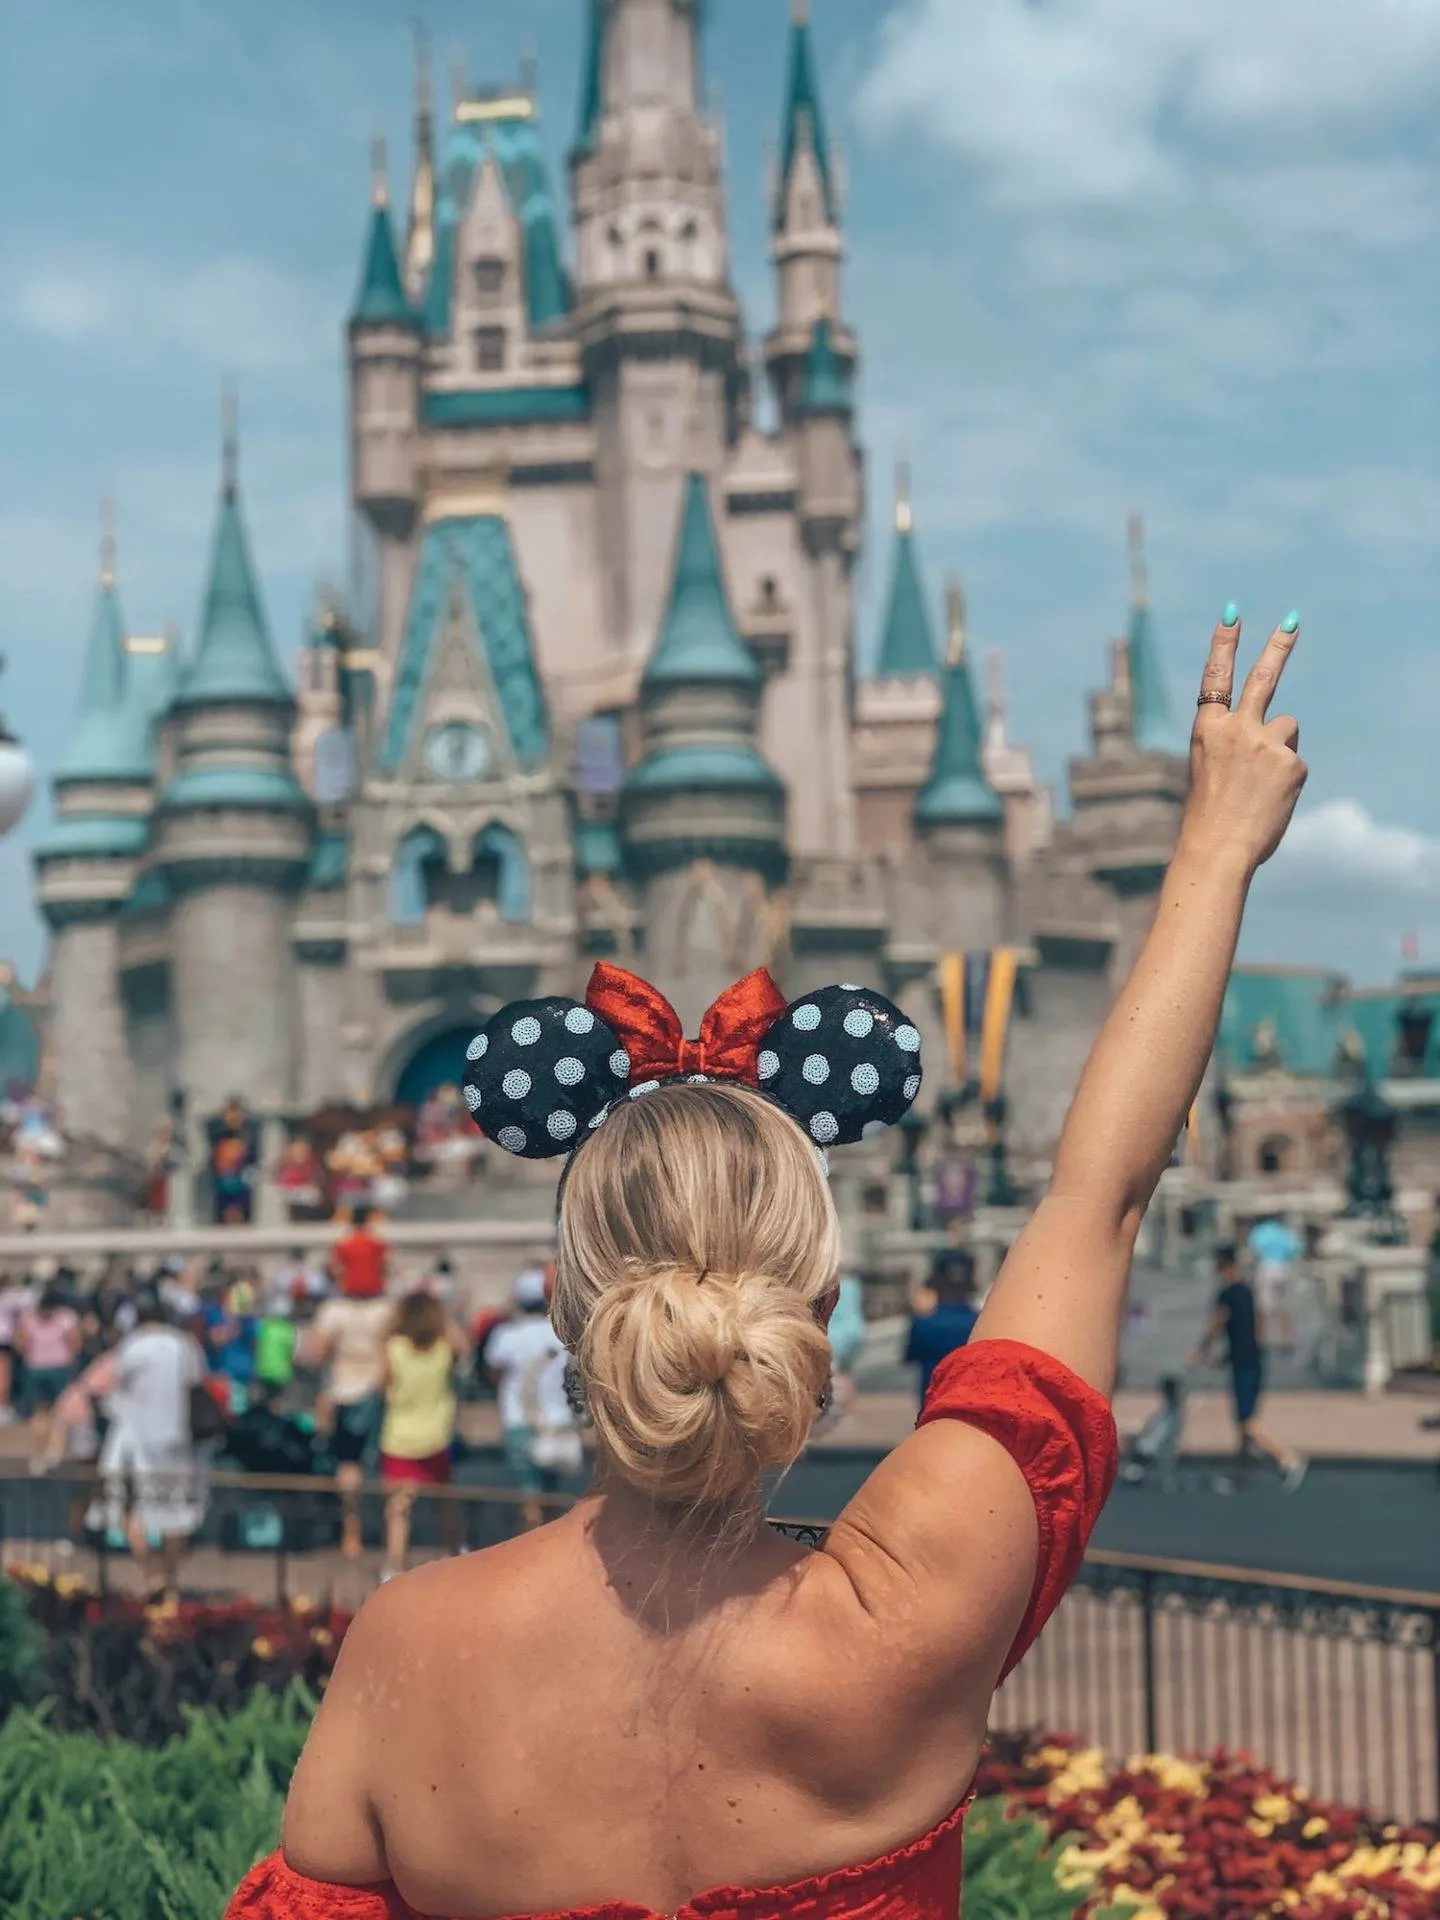 Disney photo inspo. Click the photo for a complete guide on how to get the perfect photo at Disney! Includes a list of all the top Disney World photo spots. via www.kirstenwendlandt.com